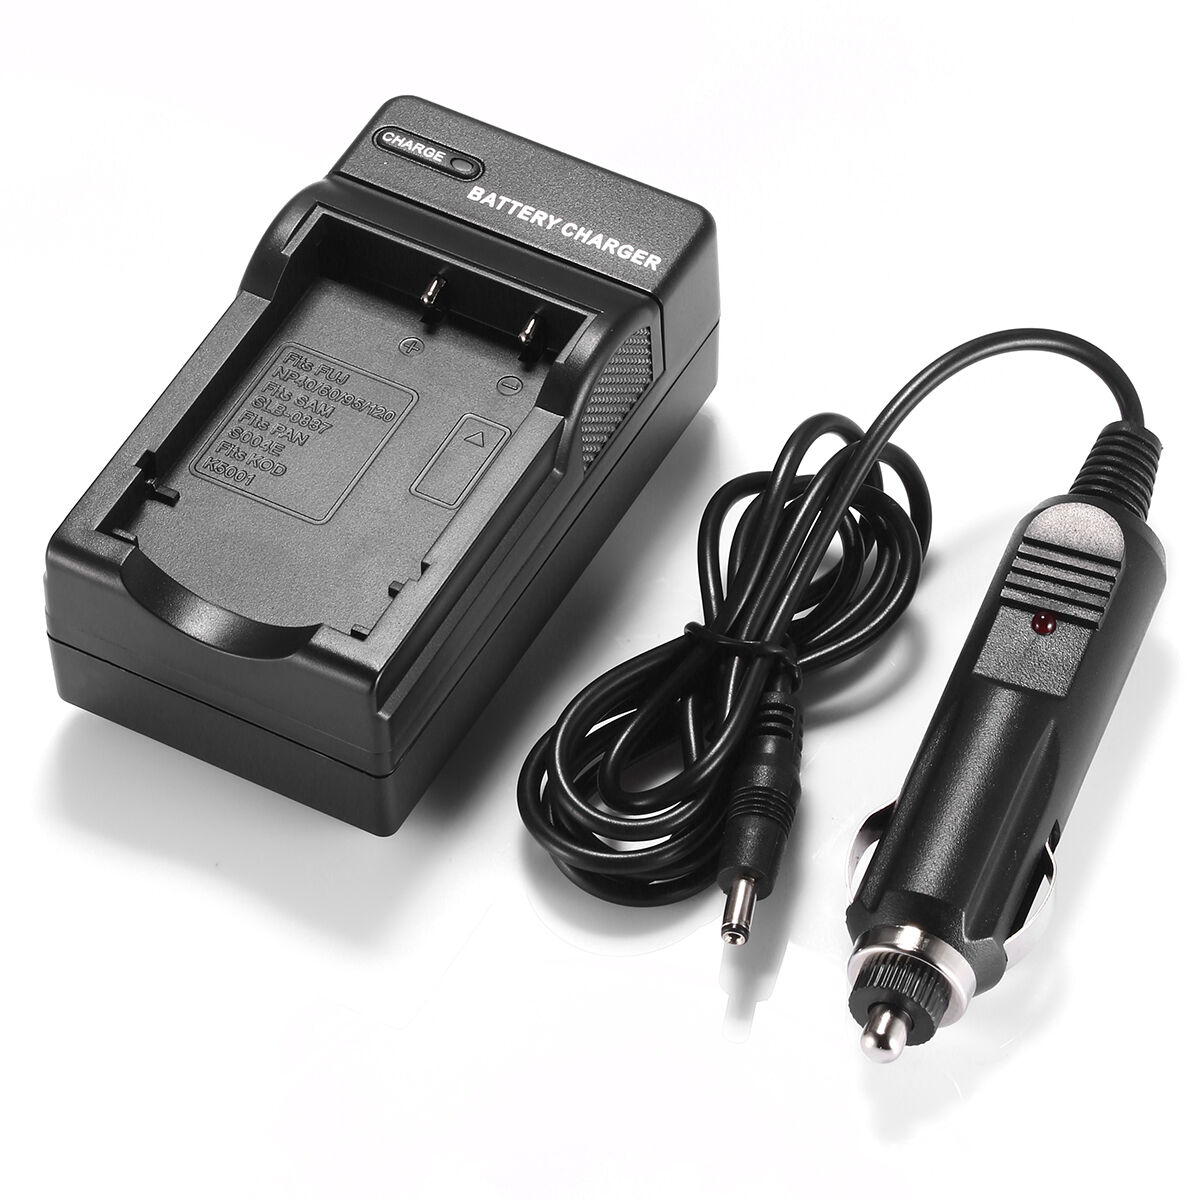 SONY Mylo COM-1/W battery charger